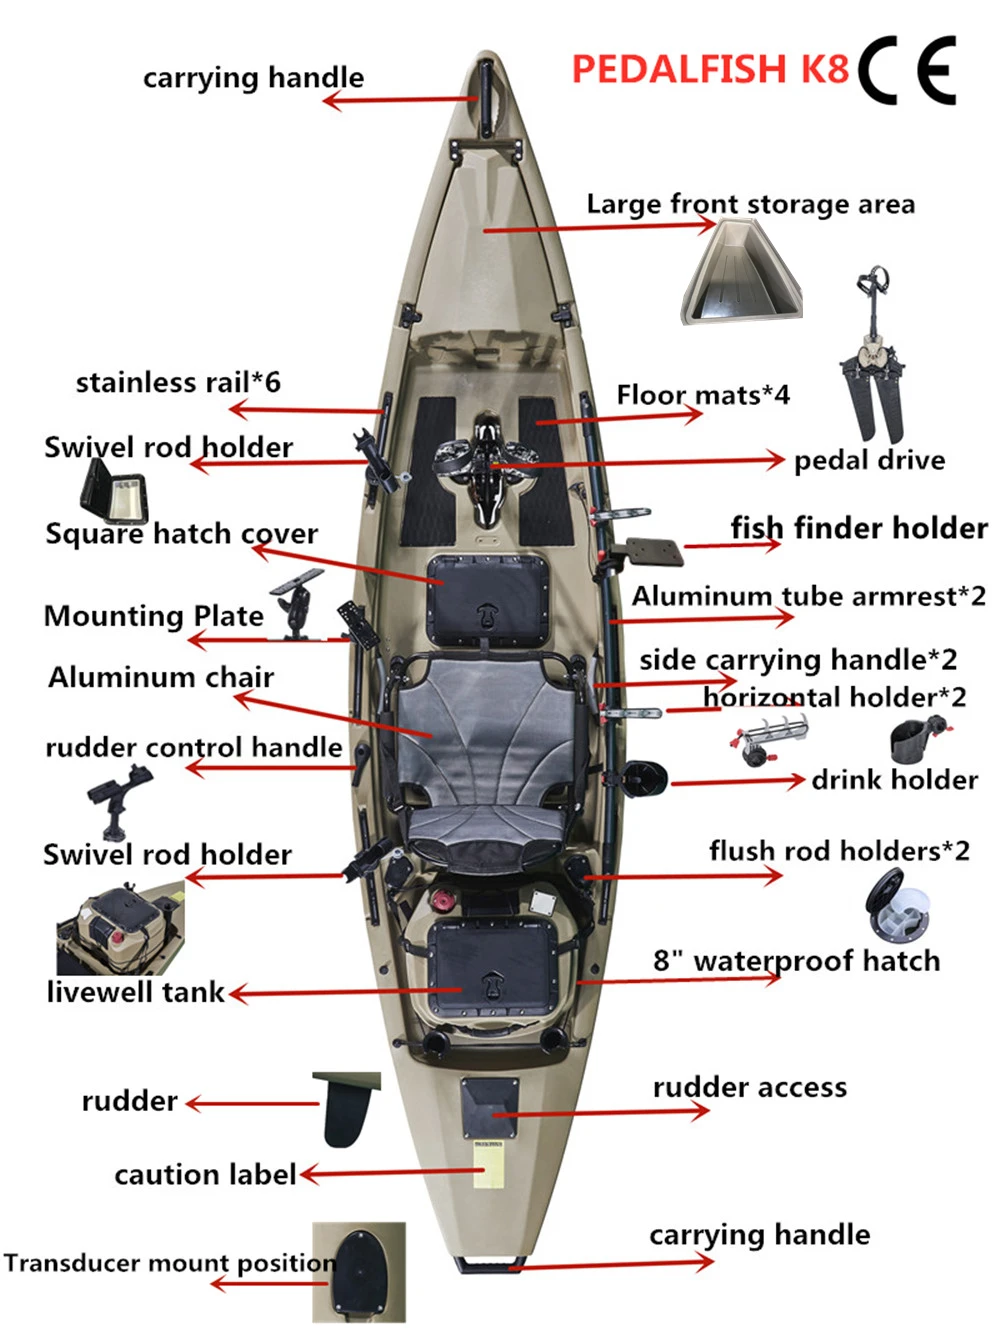 Andy Hua on LinkedIn: U-BOAT FISHING KAYAK WITH PEDAL DRIVE SYSTEM